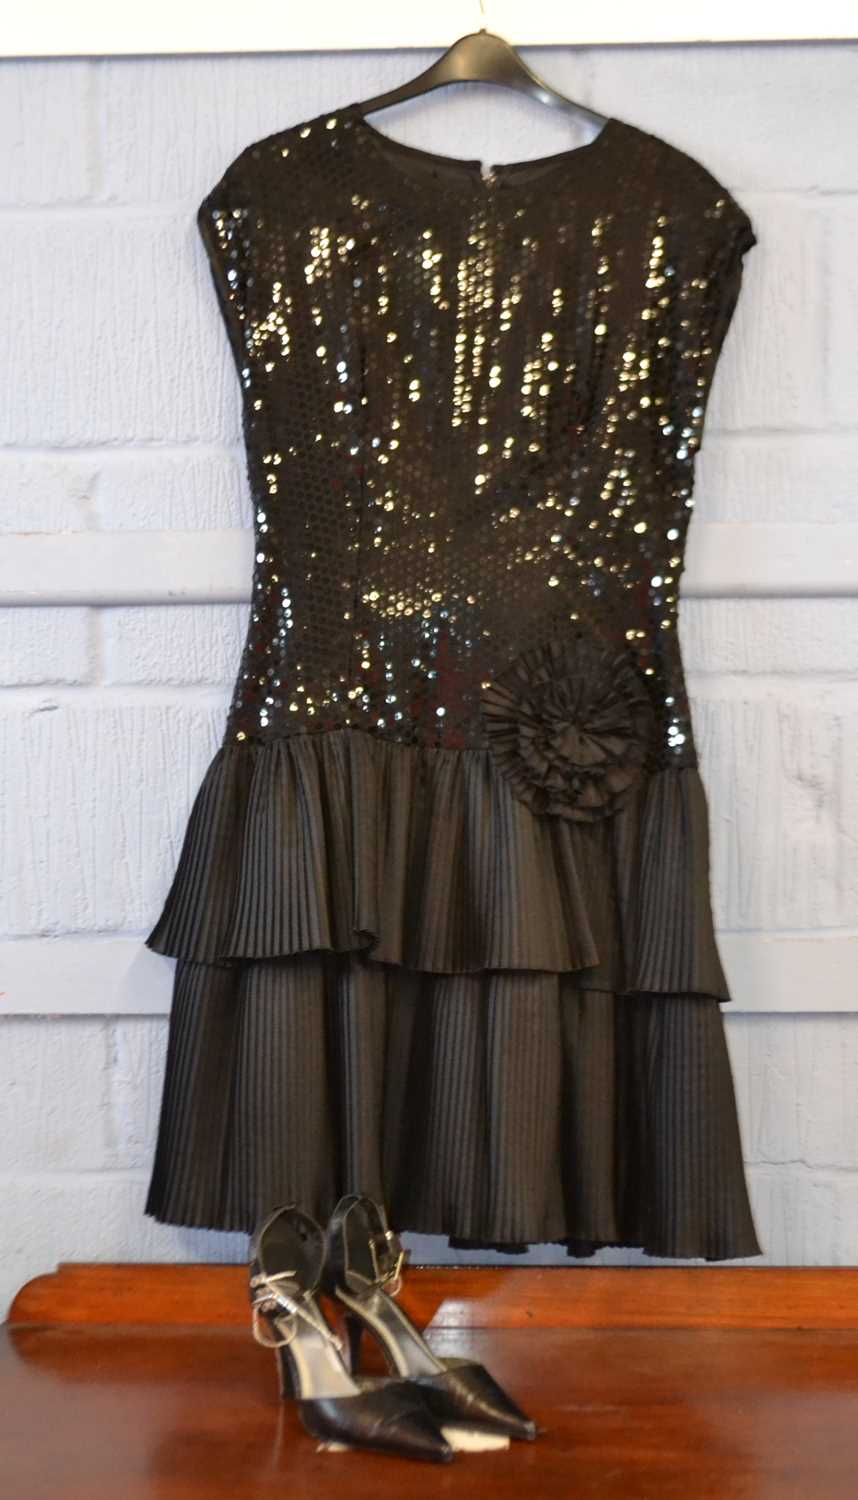 A c.1980's/90's black sequin and ruffled cocktail dress by John Charles, size 14, together with a - Image 2 of 5